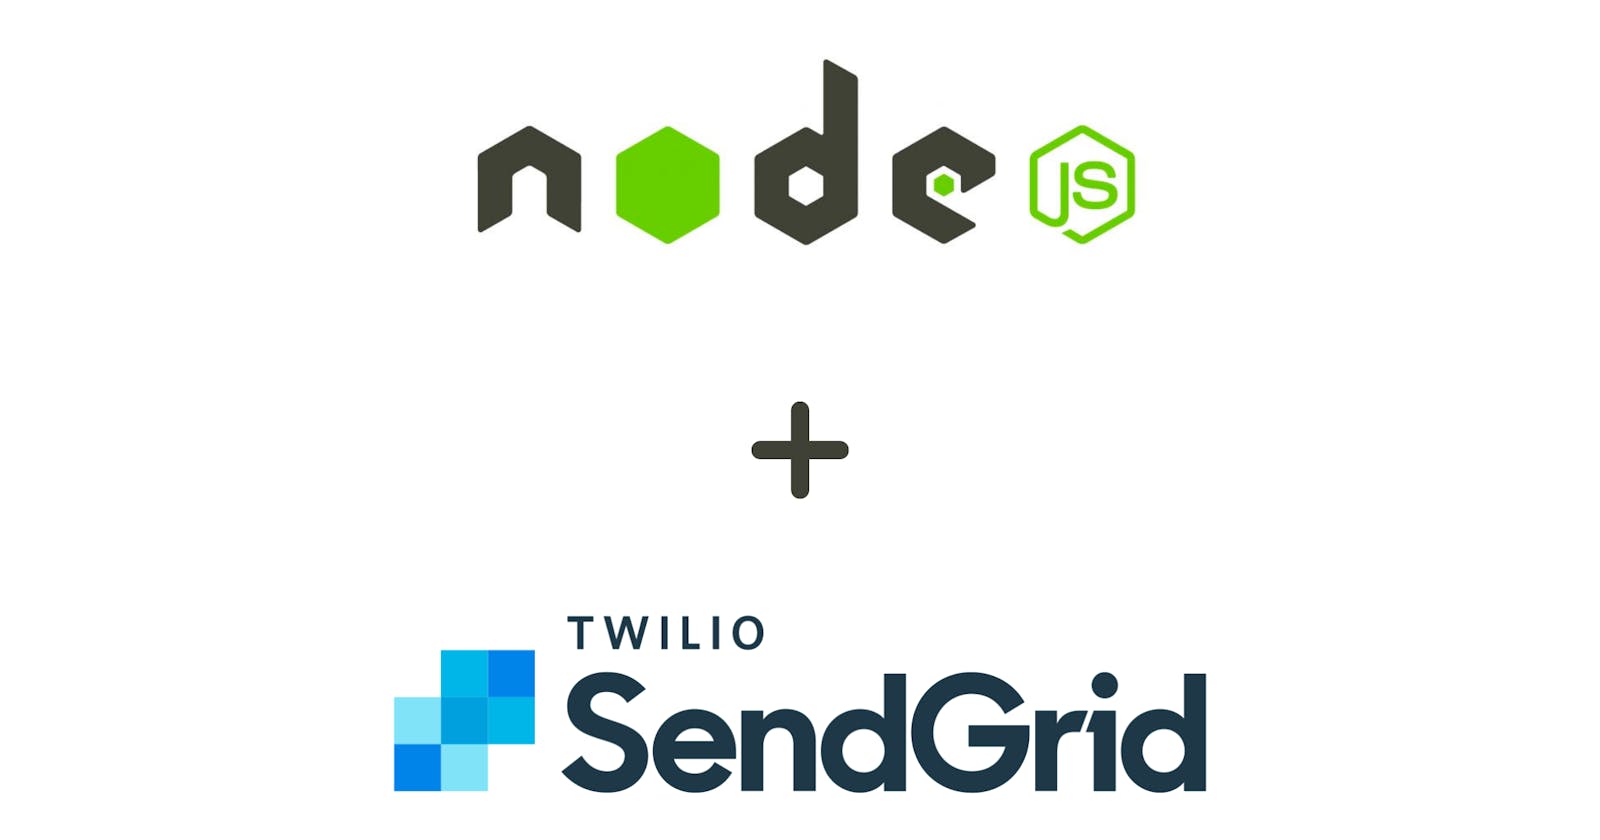 How to send a email using Sendgrid and Node.js ?